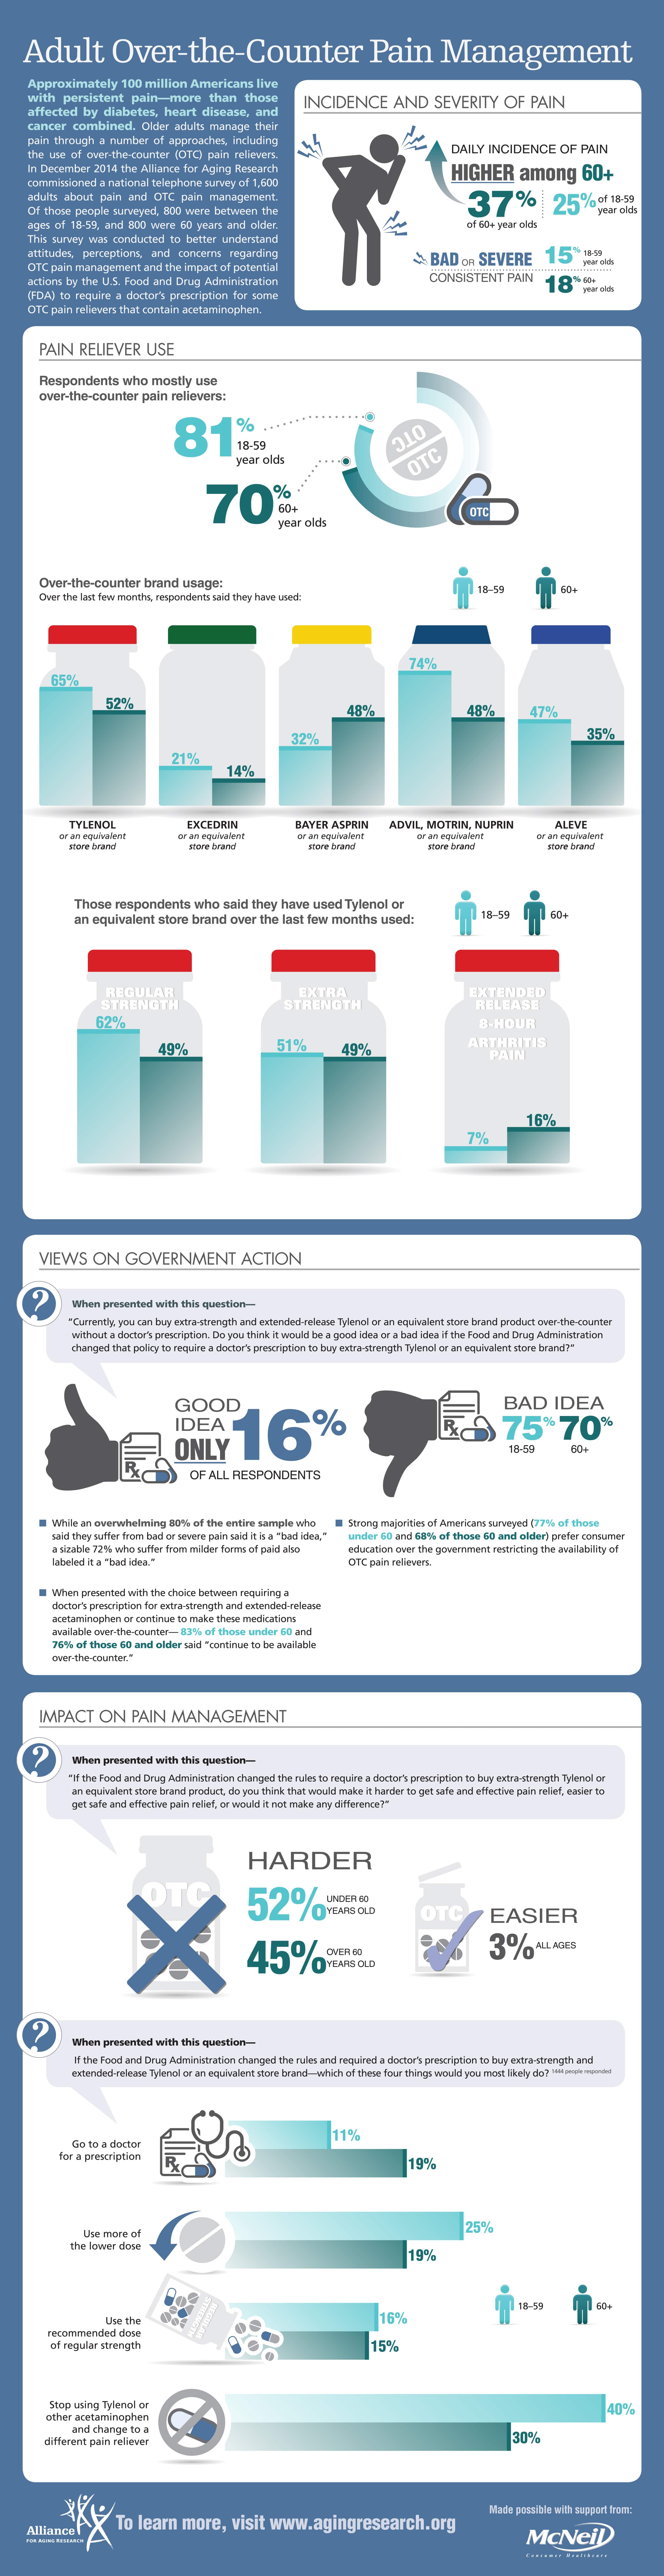 "Adult Over-the-Counter Pain Management" Infographic